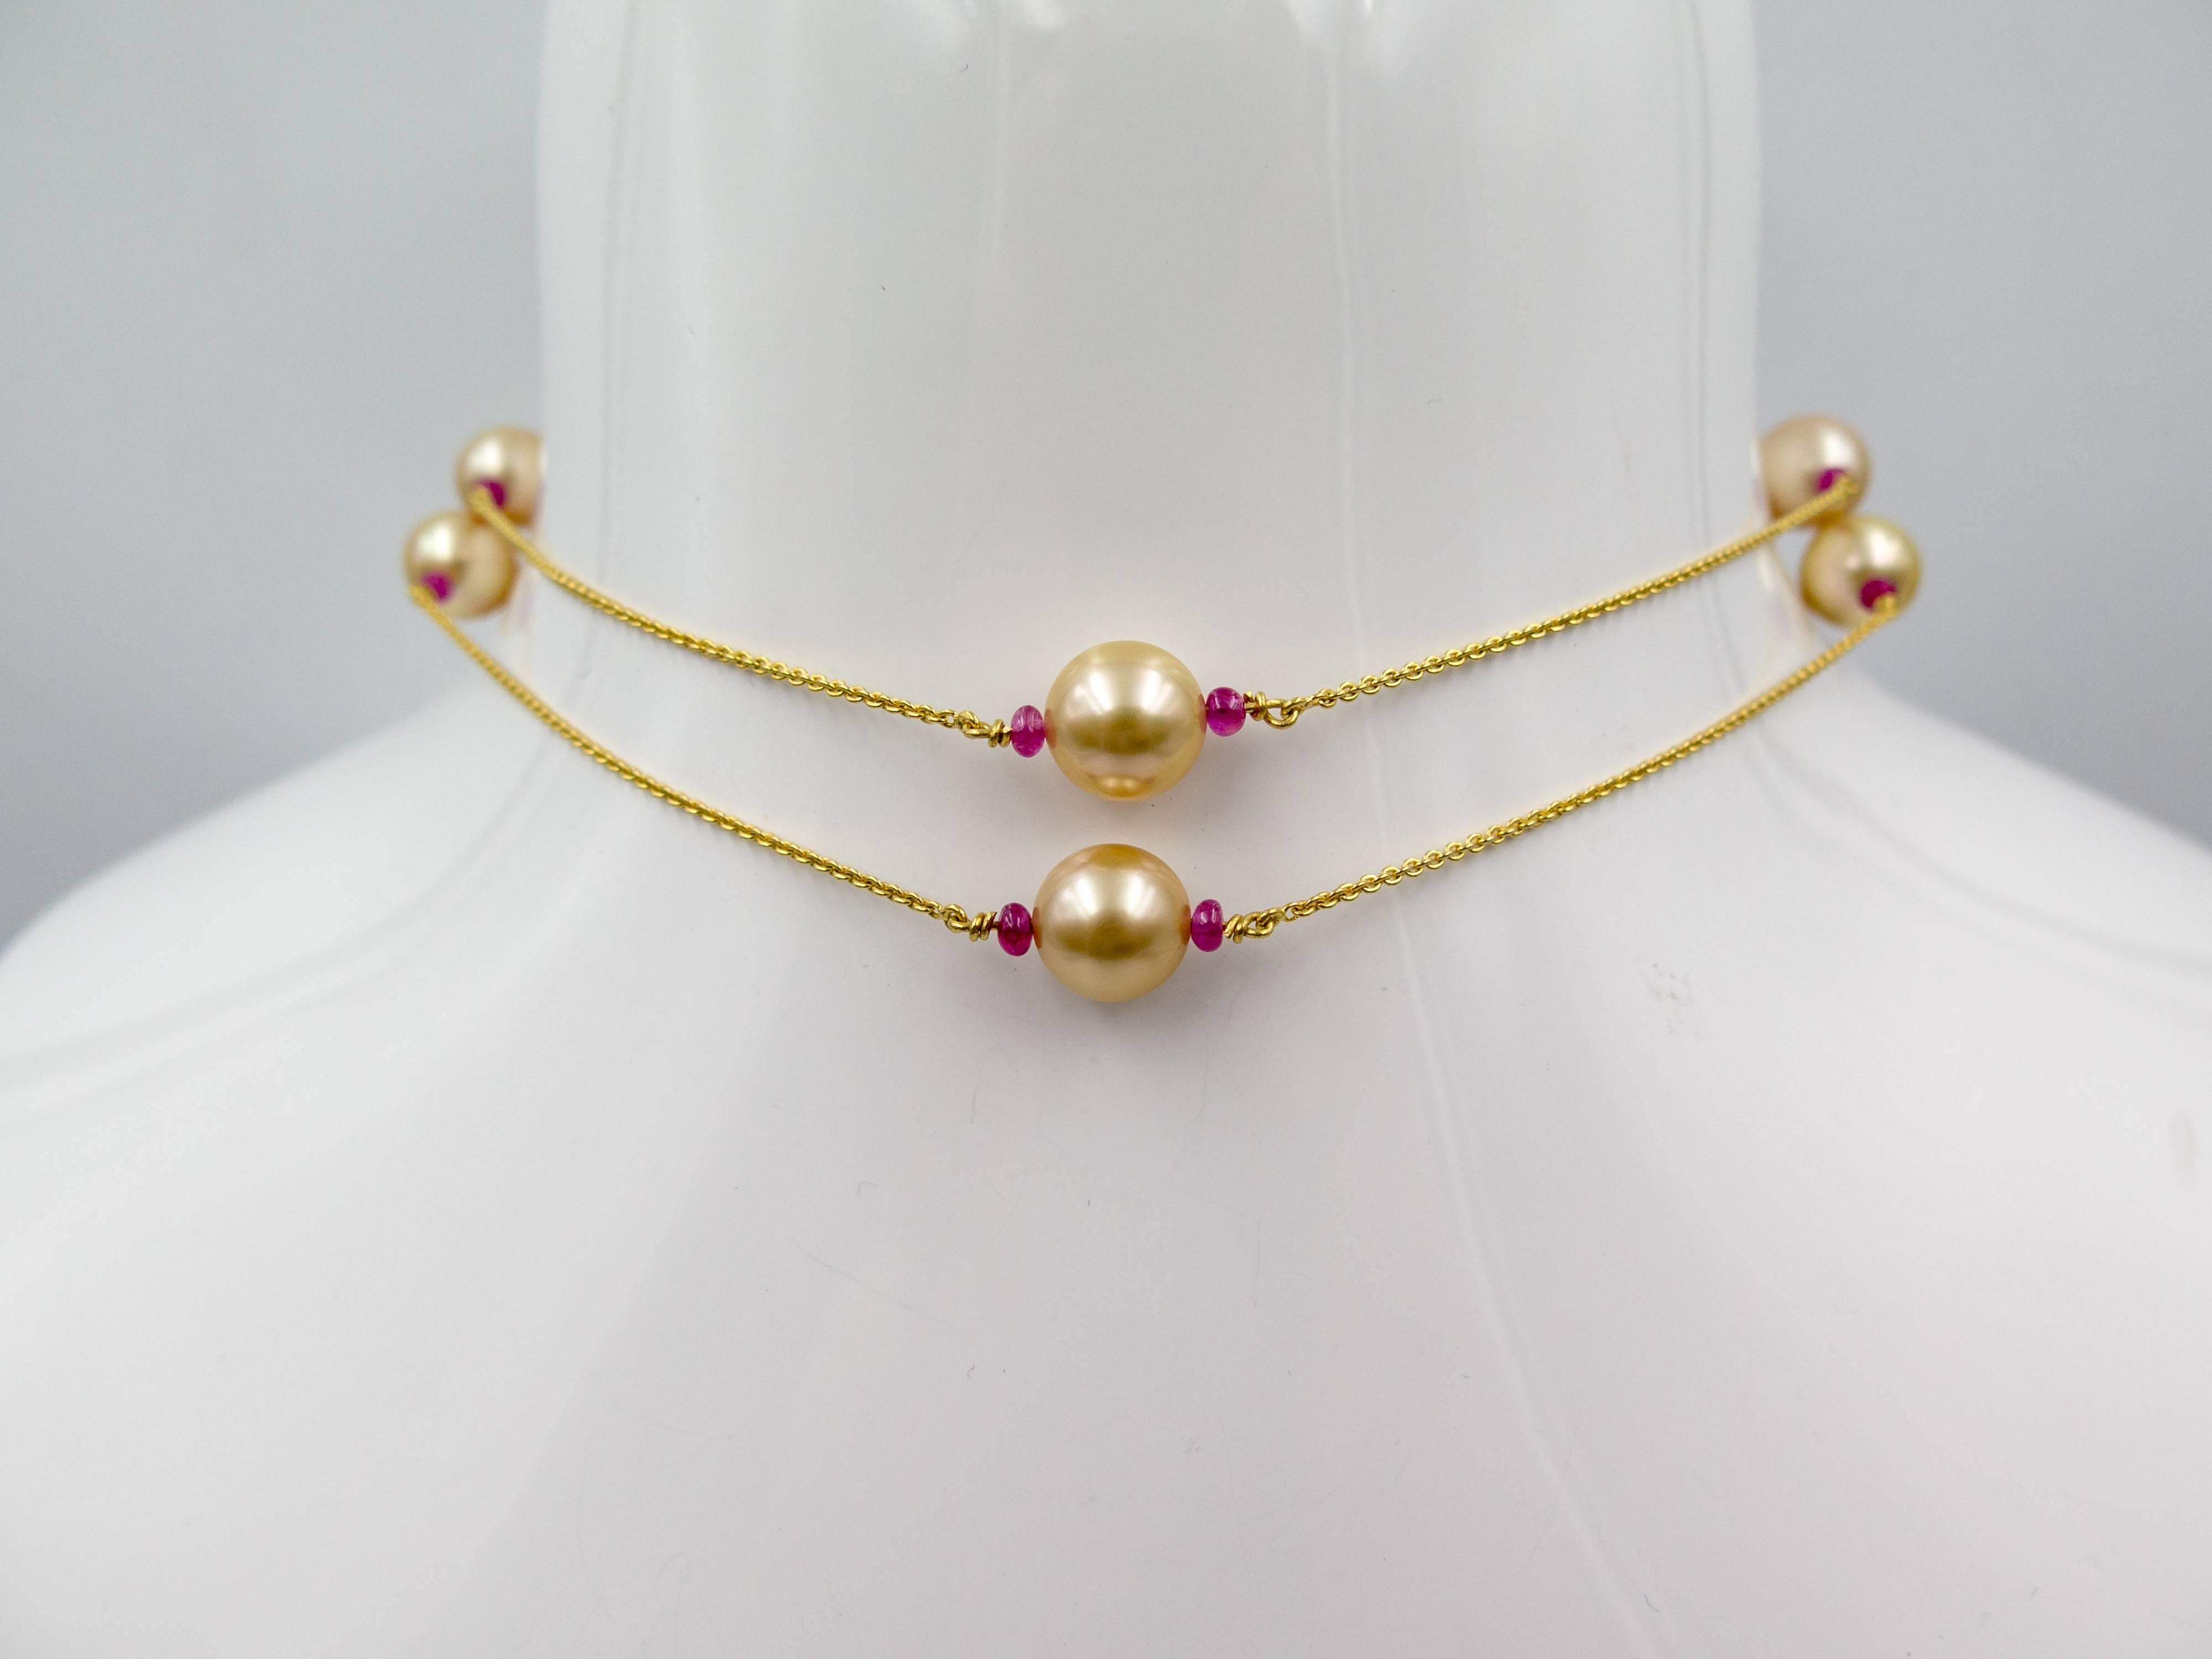 A lovely necklace with a harmonious ensemble of rich 18 karat yellow gold, deeply lustrous golden pearls, all accented with lentil shaped red rubies.   The chain measures 27" in length, and is set with 8 golden pearls measuring about 9 1/2-10